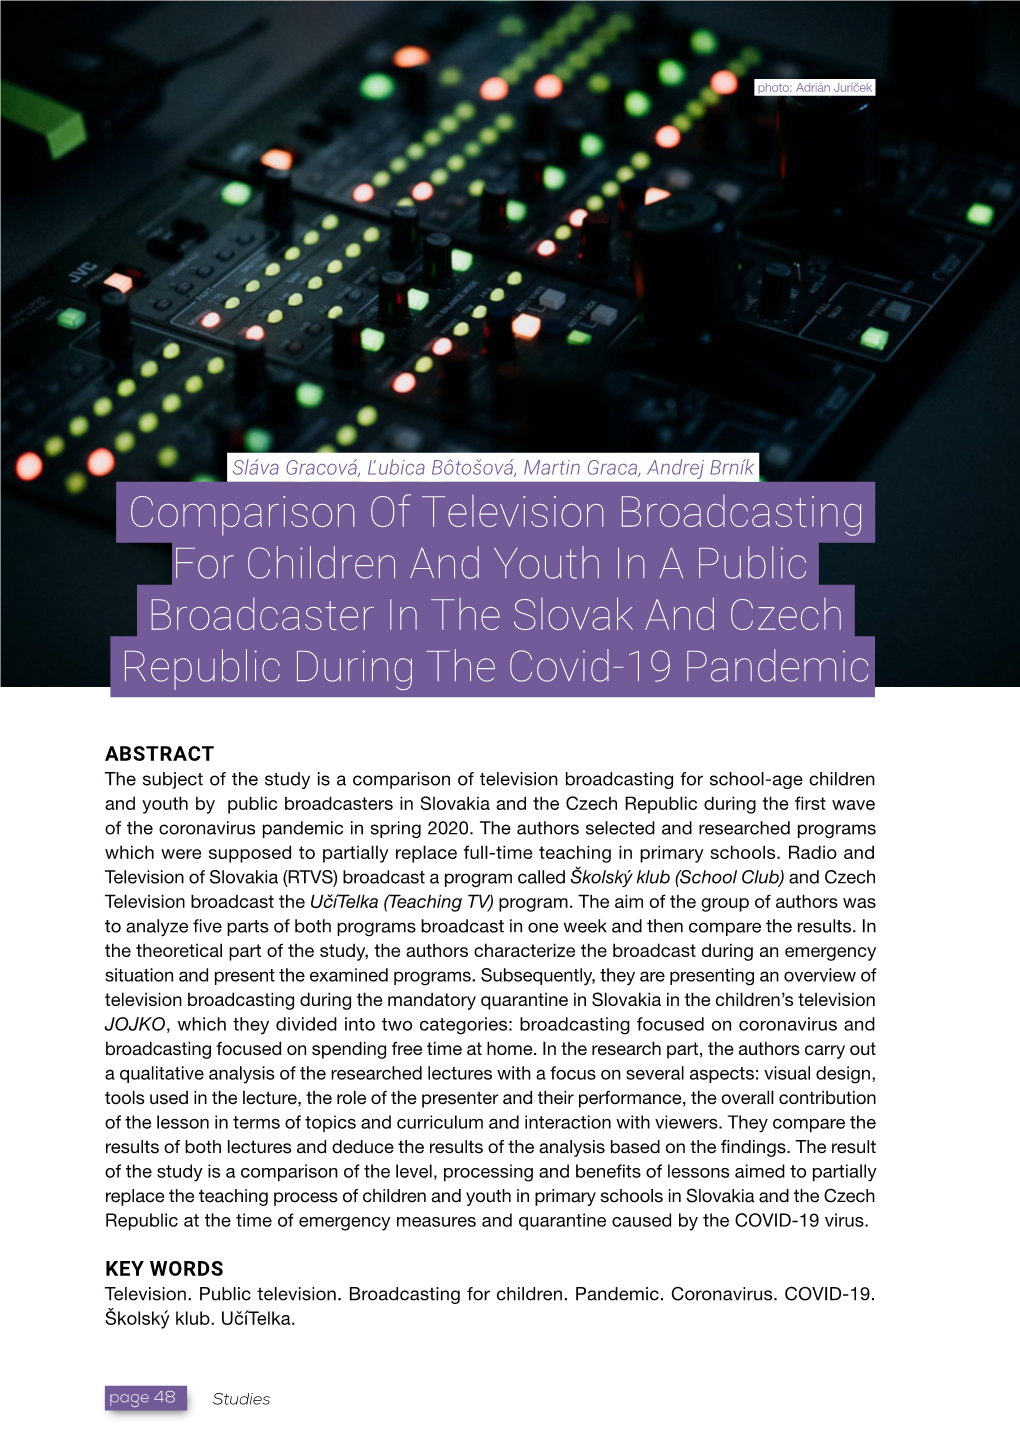 Comparison of Television Broadcasting for Children and Youth in a Public Broadcaster in the Slovak and Czech Republic During the Covid-19 Pandemic